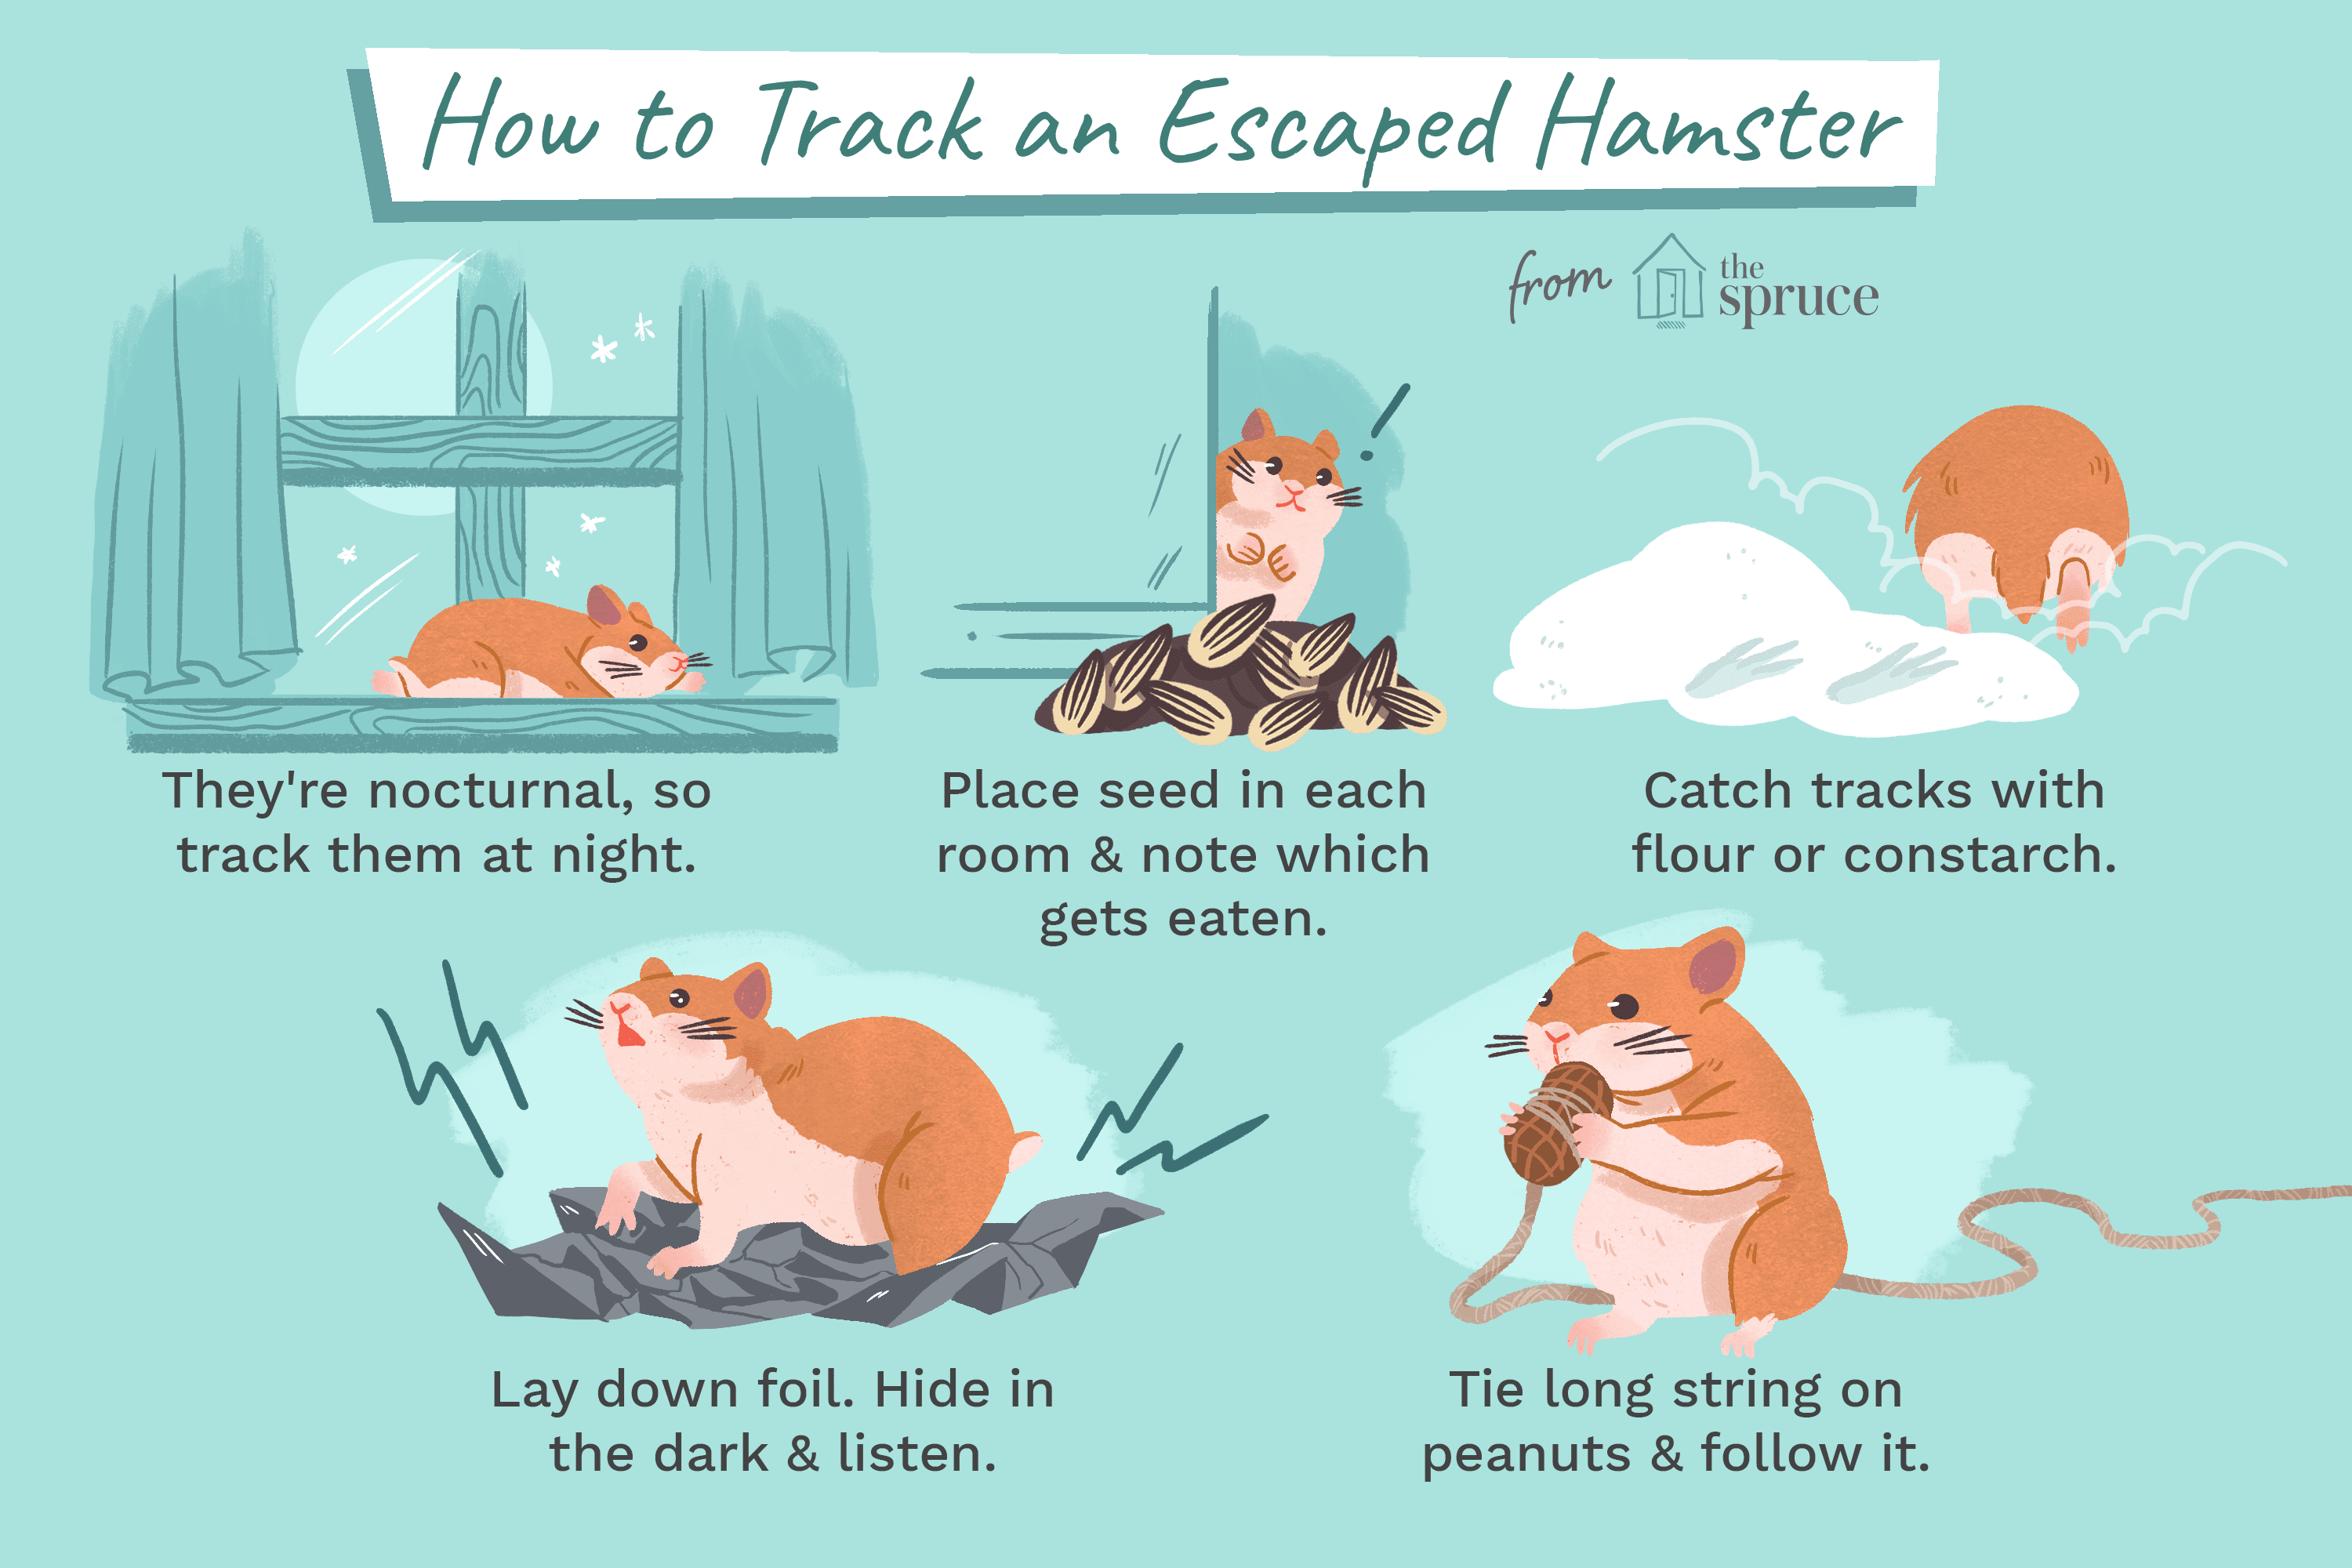 Tips and tricks for finding a hamster who escaped.